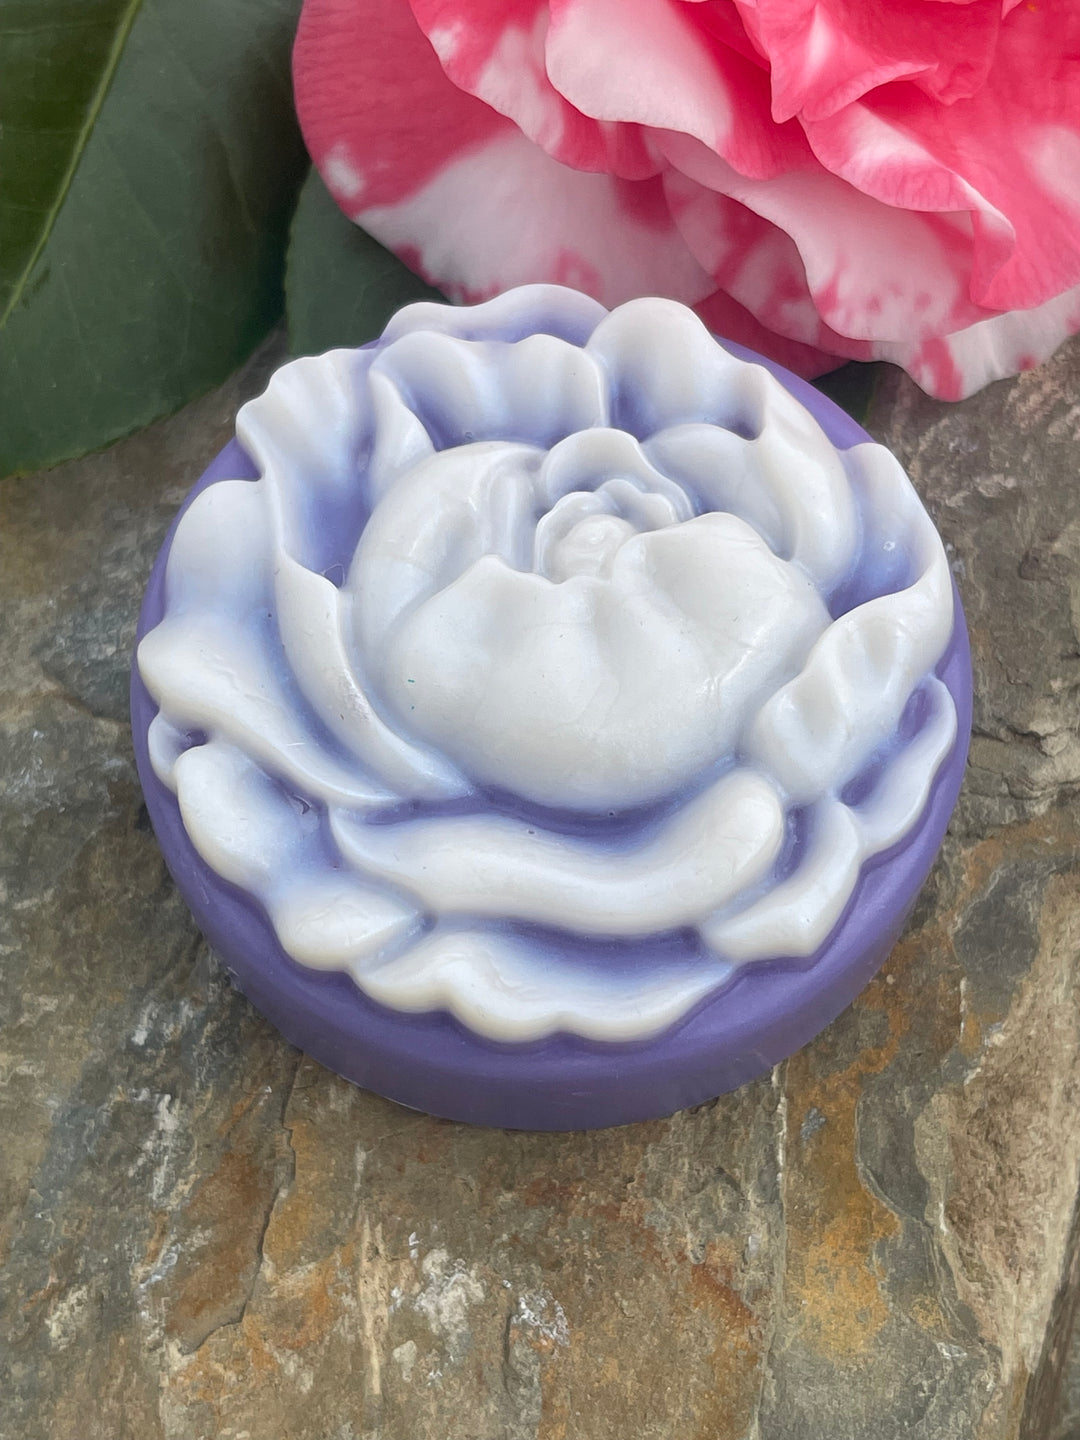 The Floral Shop Soaps, Jasmine, Plumeria, Lilac and Hyacinth Scents